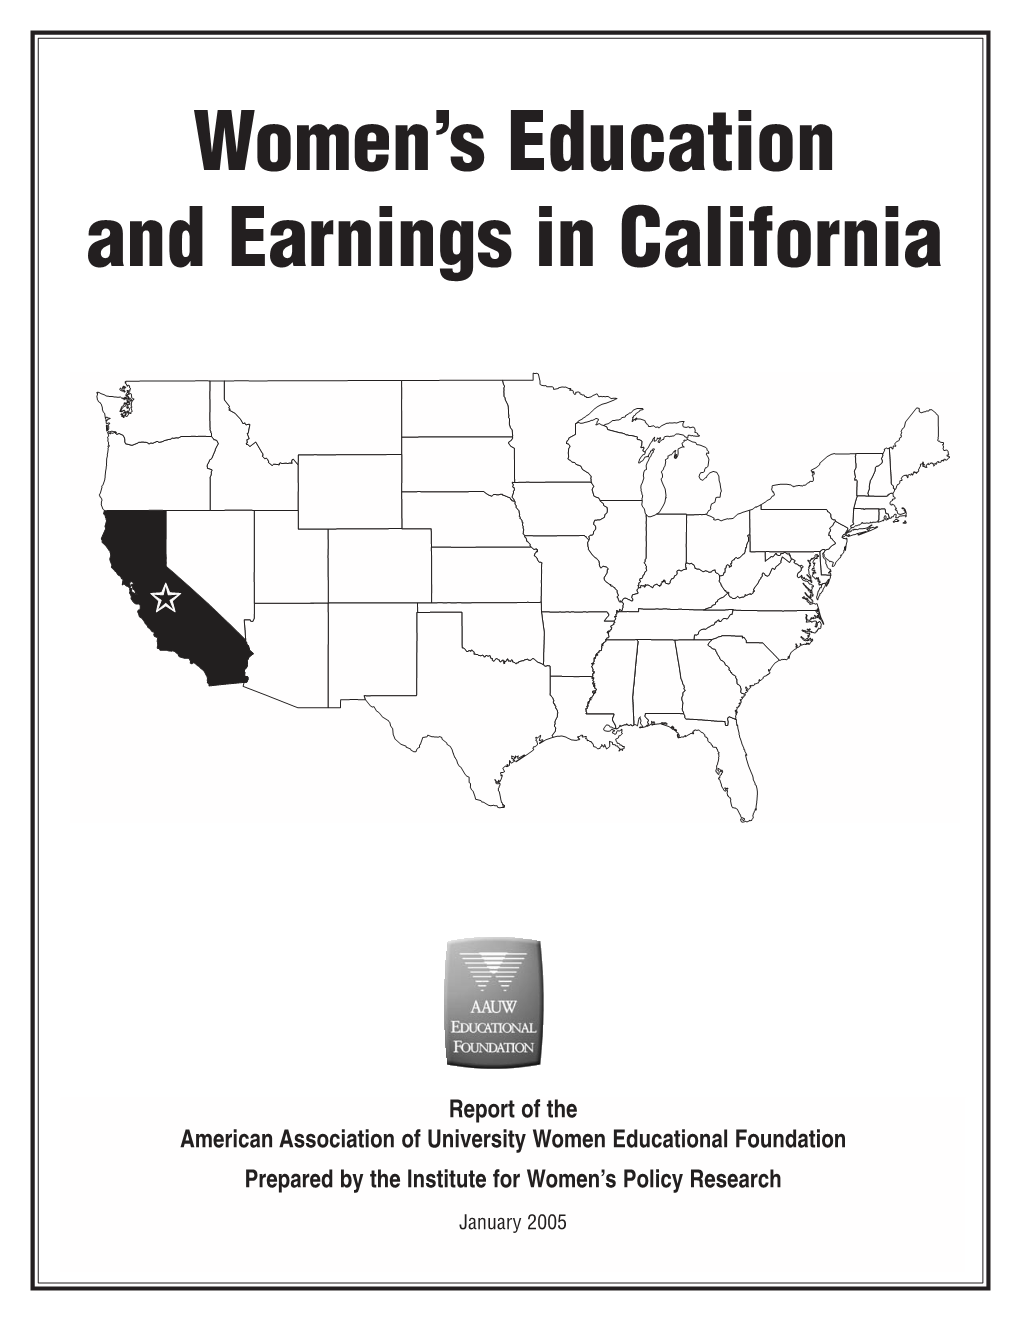 Women's Education and Earnings in California